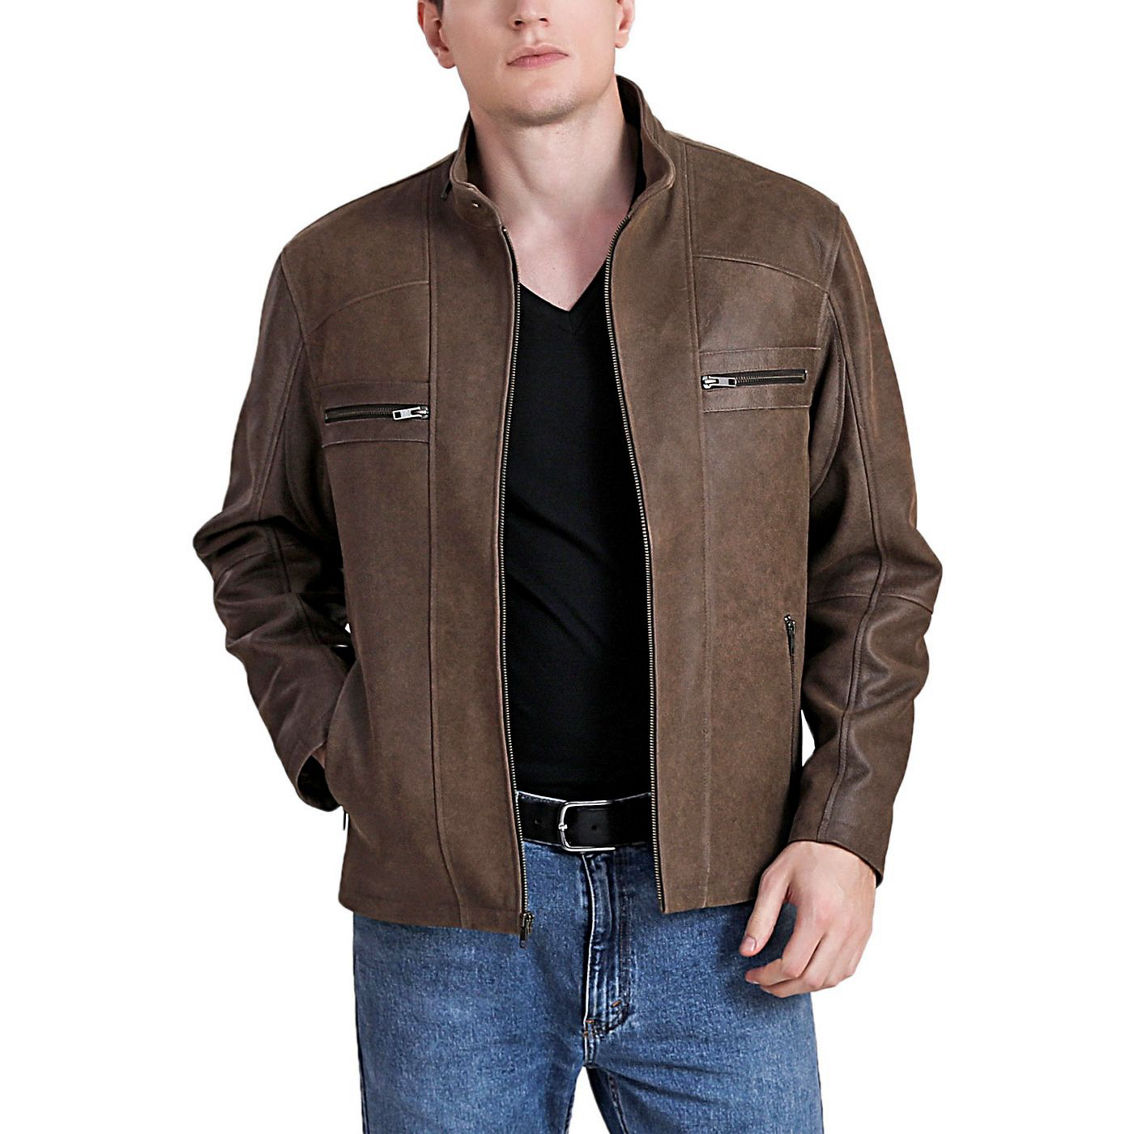 Bgsd Men Ethan Distressed Cowhide Leather Motorcycle Jacket | Coats ...